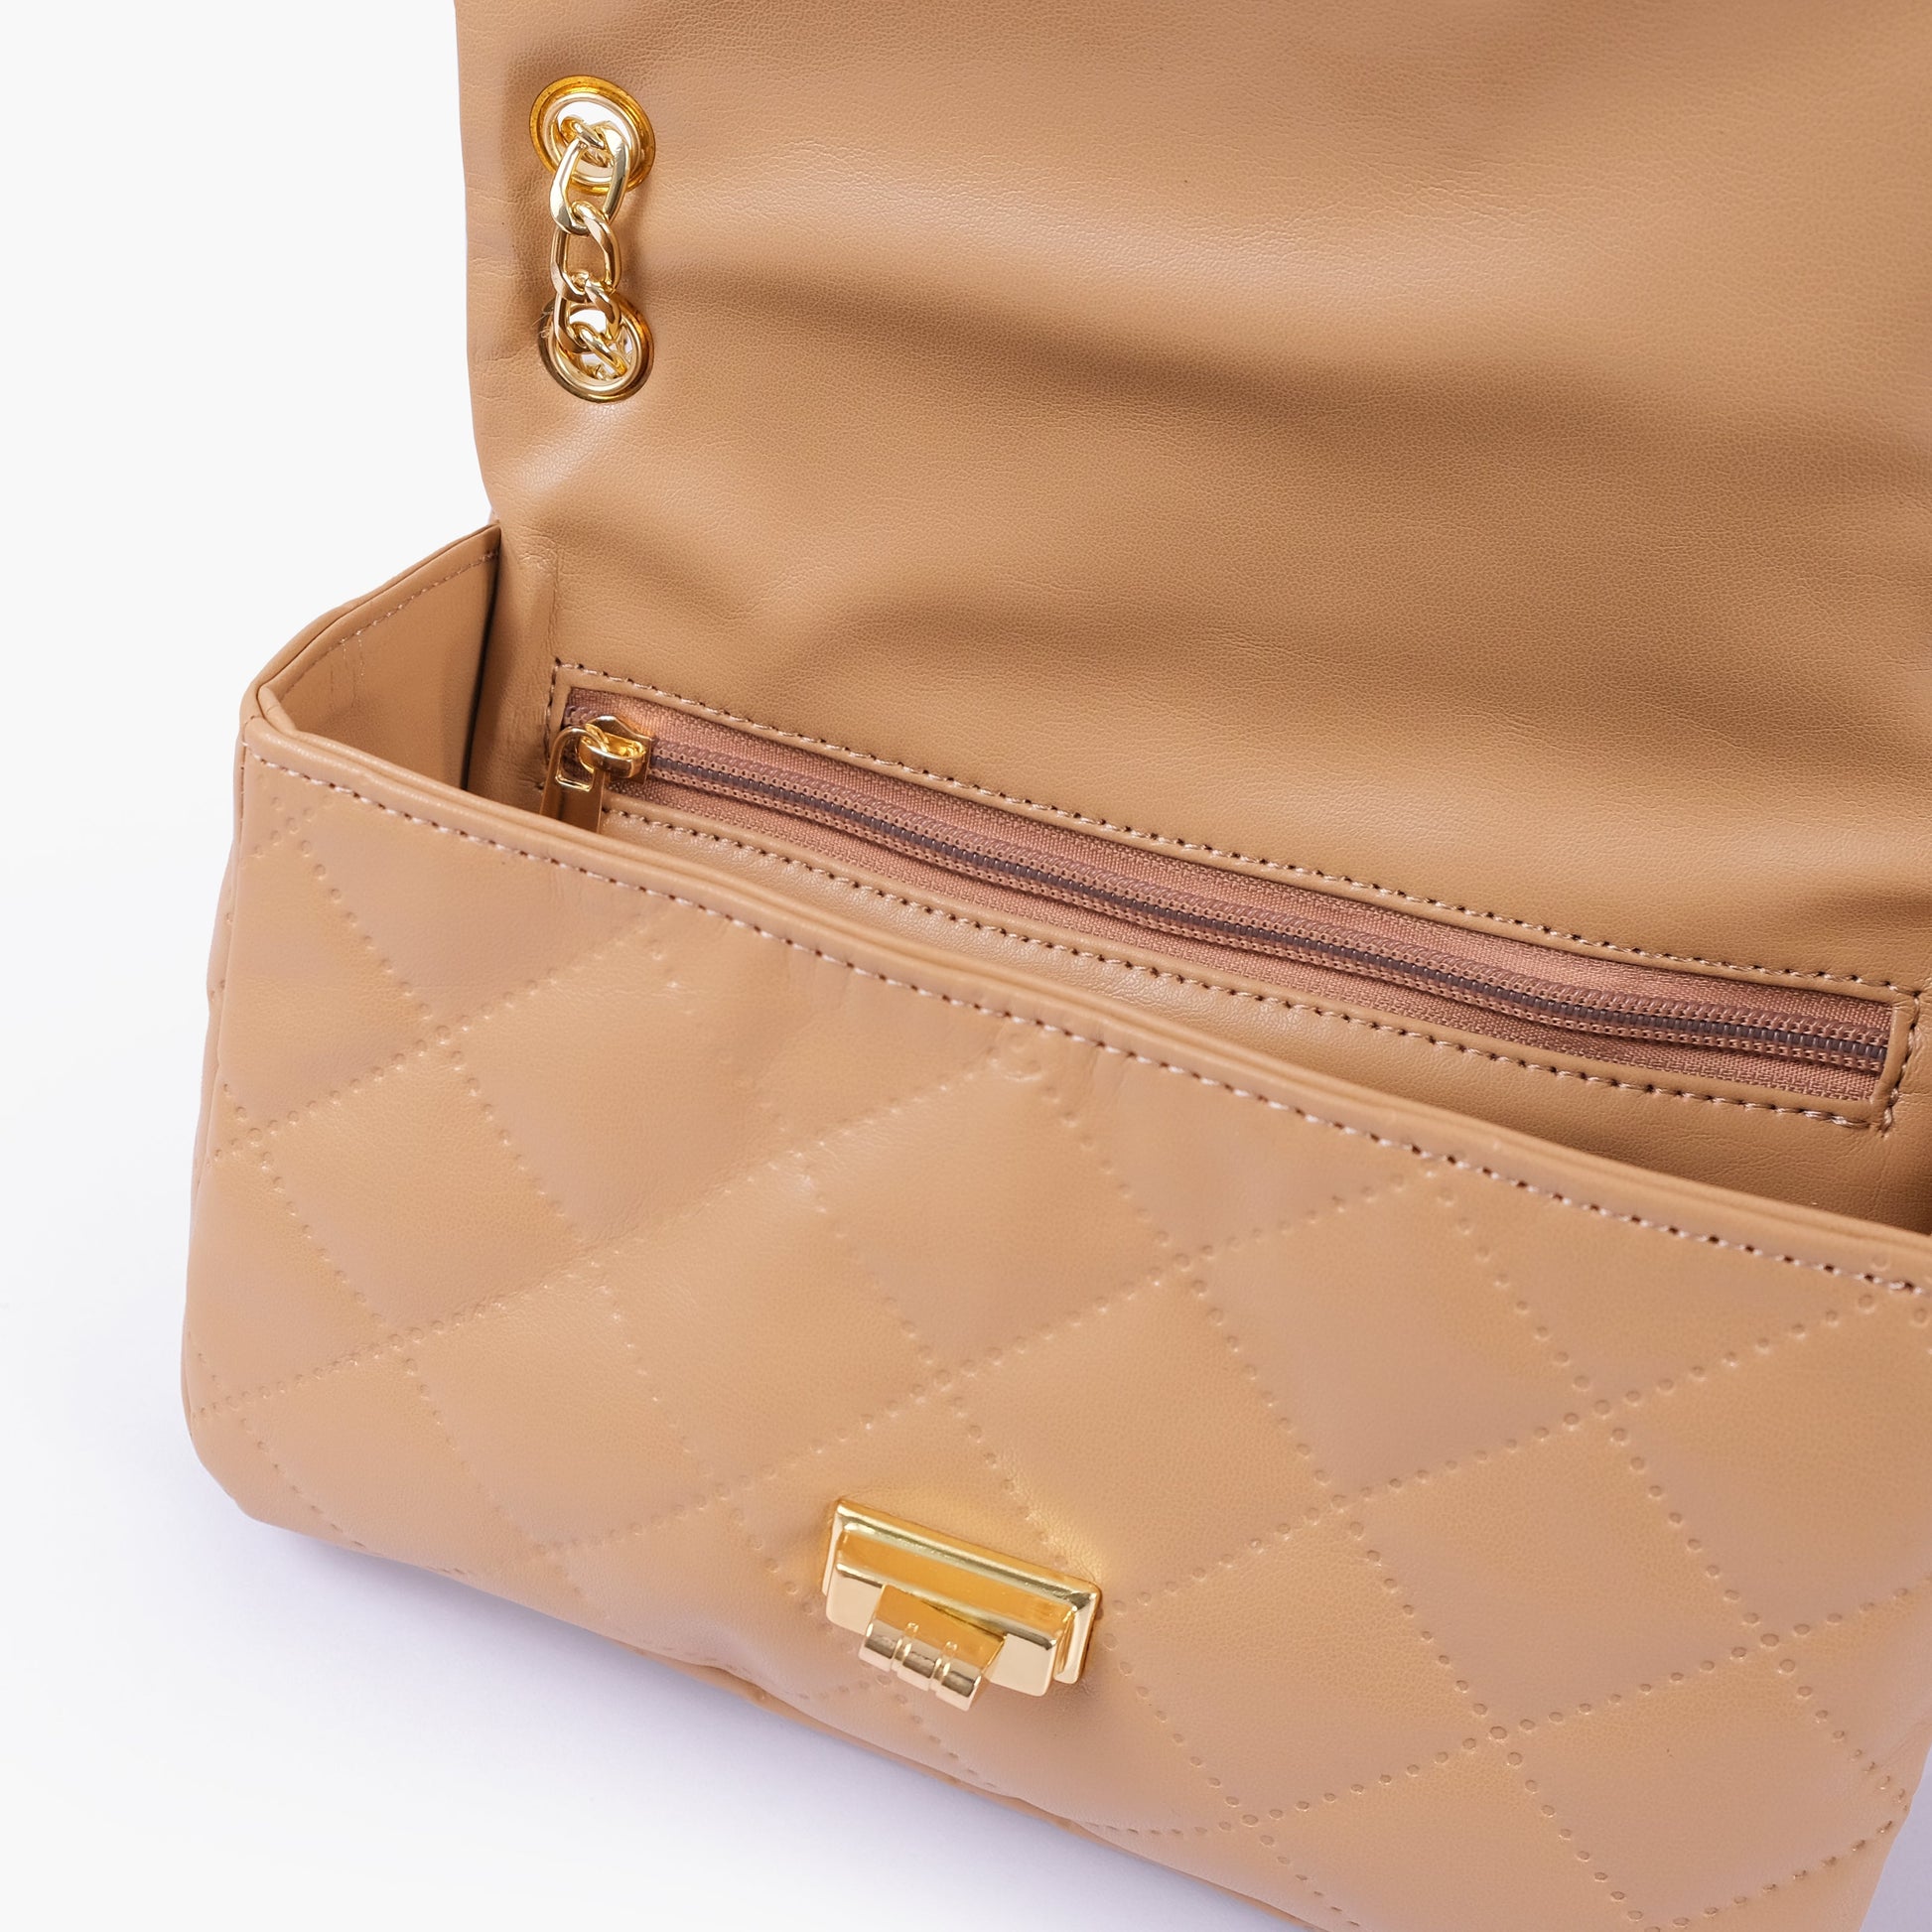 Buy Beige Quilted Mini Bag With Chain - Tan in Pakistan